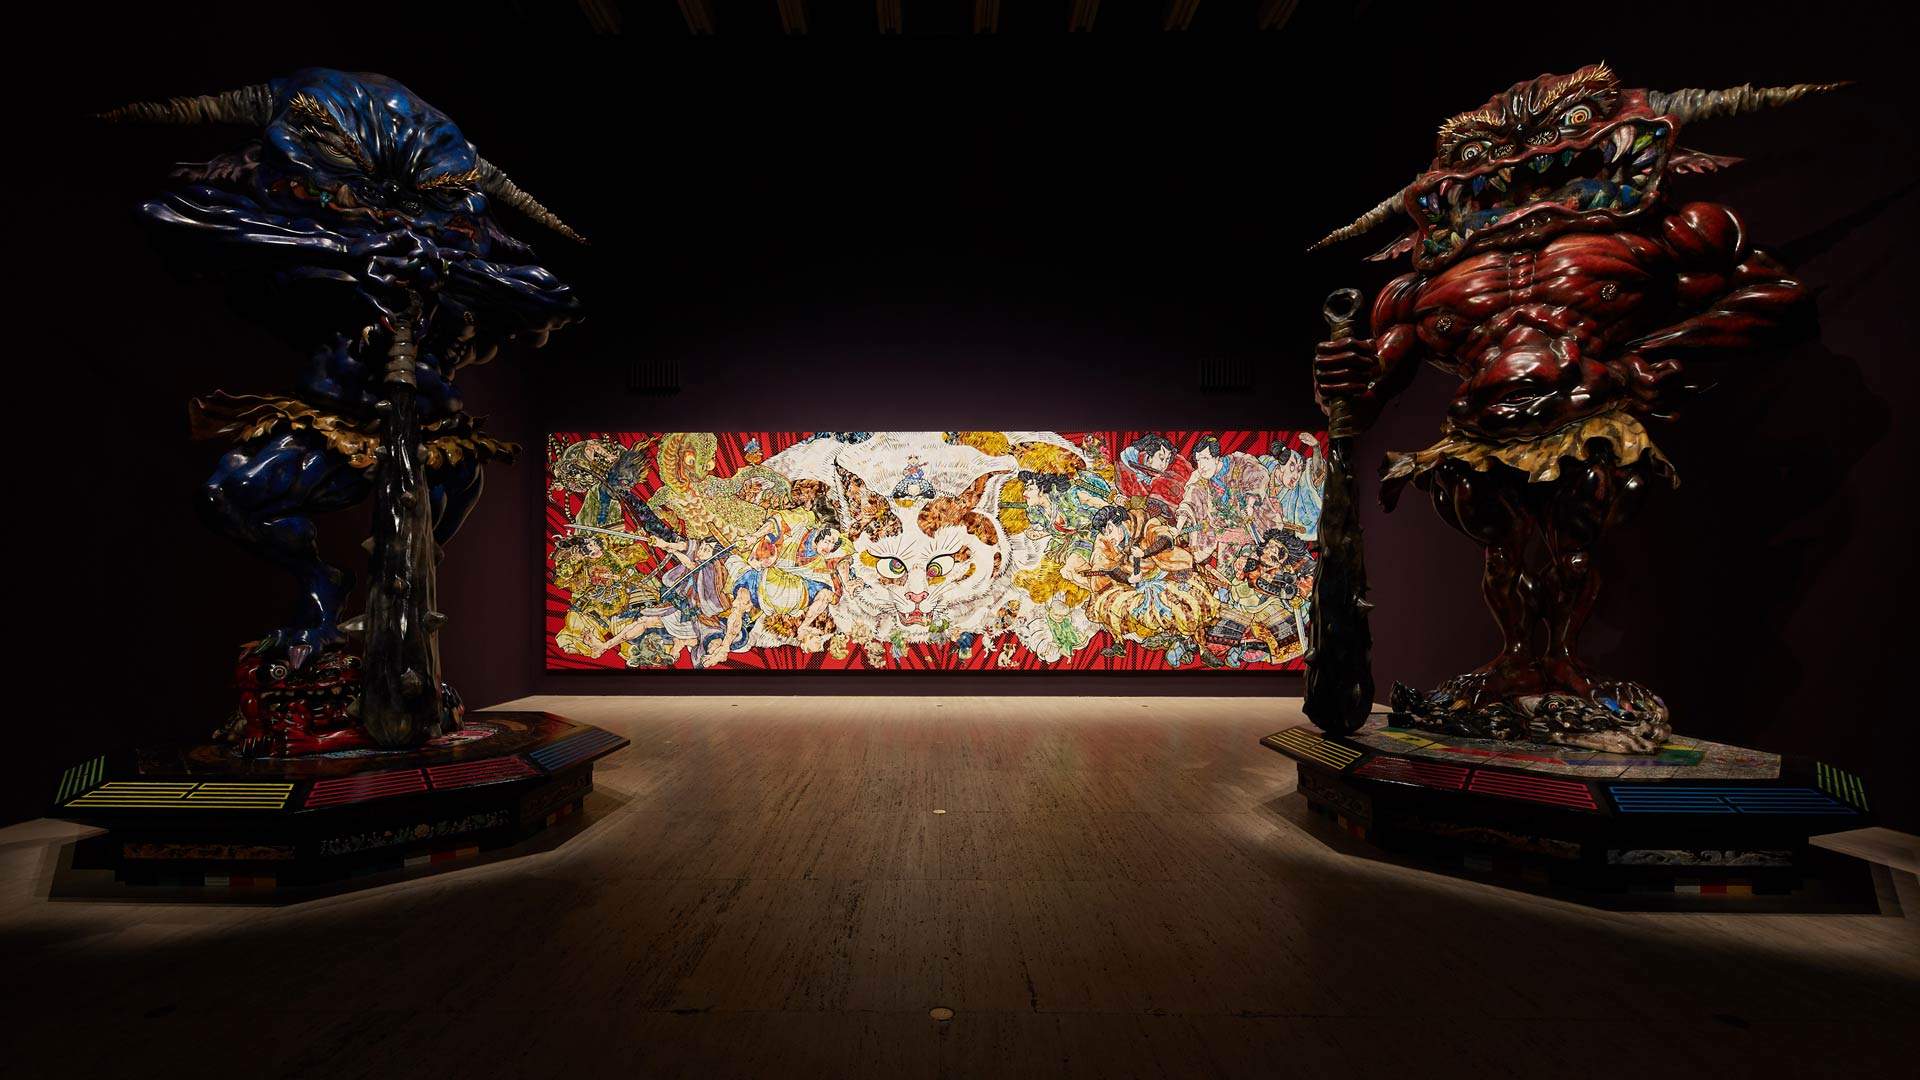 We're Giving Away Double Passes to the Art Gallery of NSW's Massive Japanese Art Exhibition